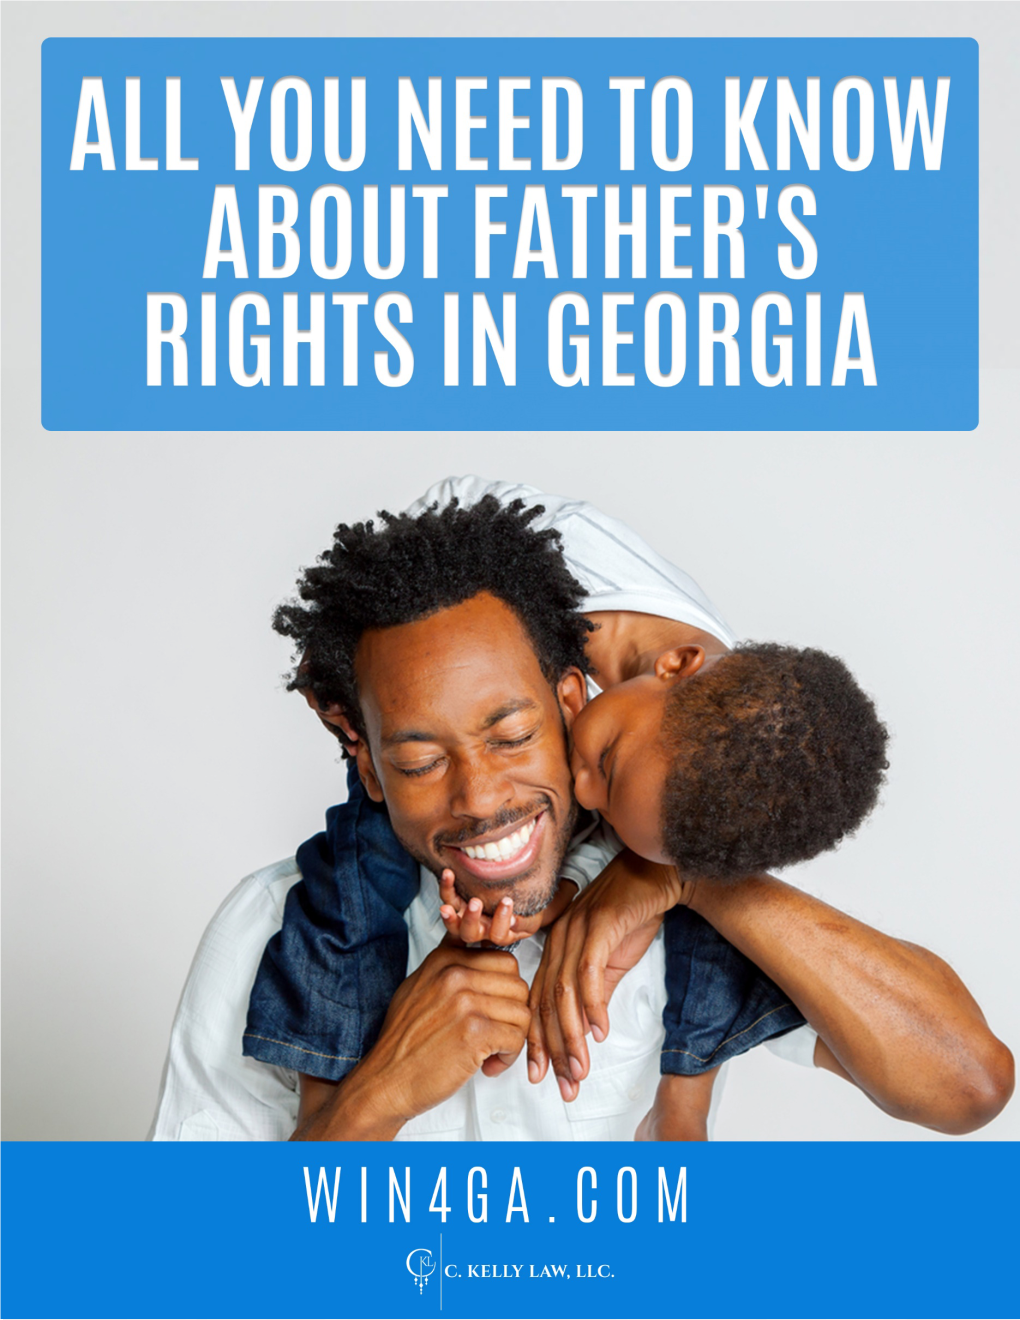 You Need to Know About Father's Rights in Georgia